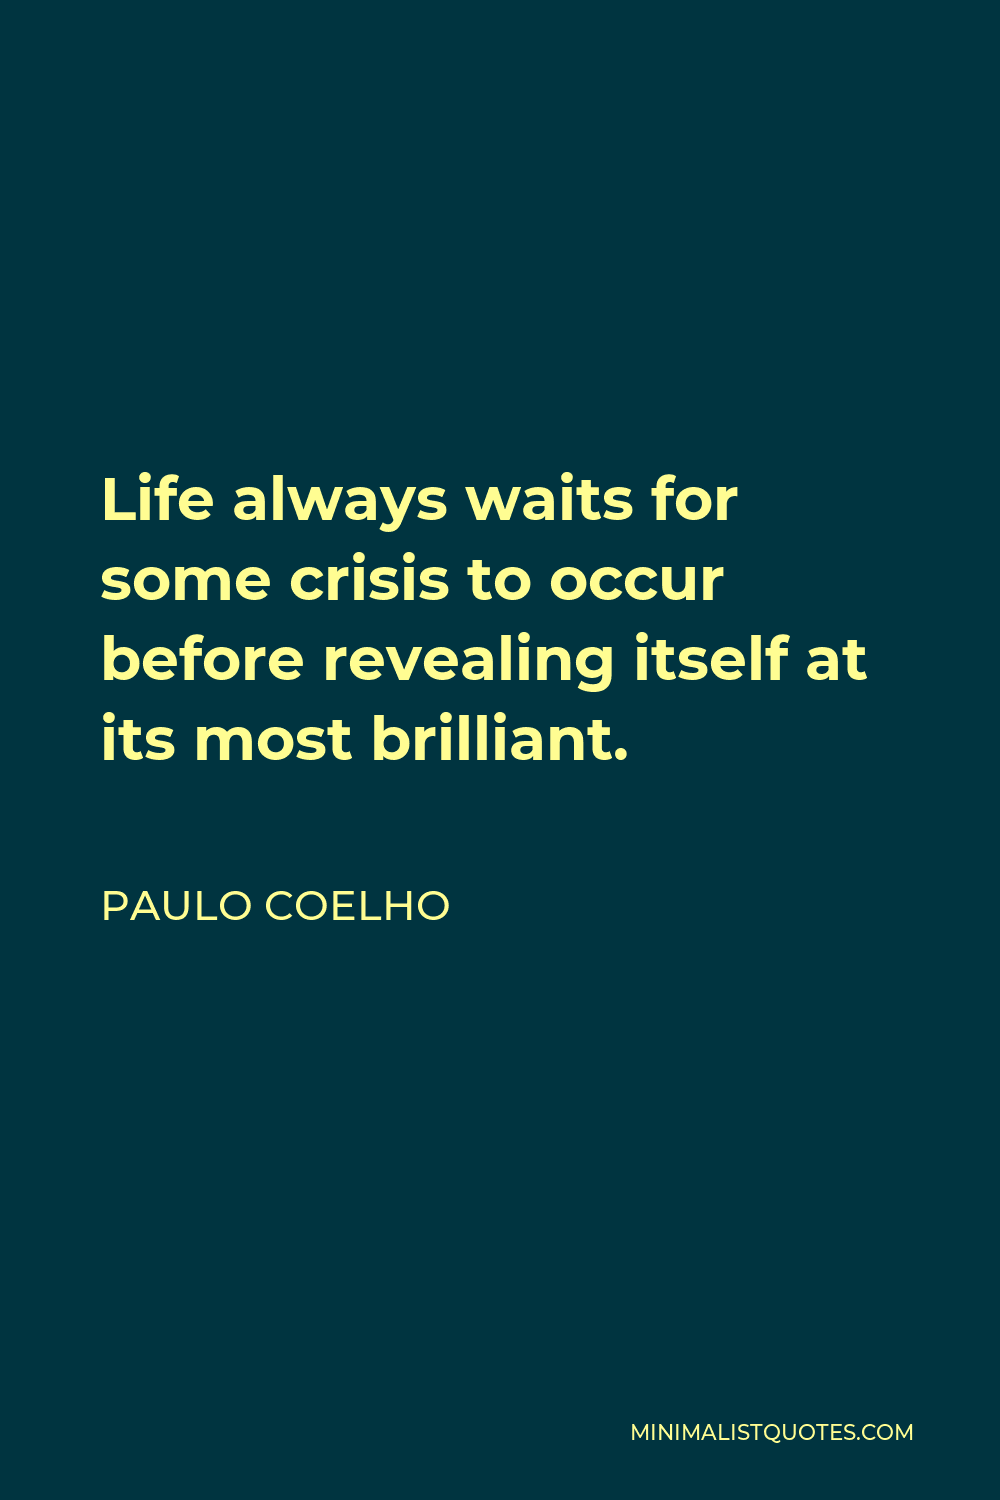 Paulo Coelho Quote - Life always waits for some crisis to occur before revealing itself at its most brilliant.